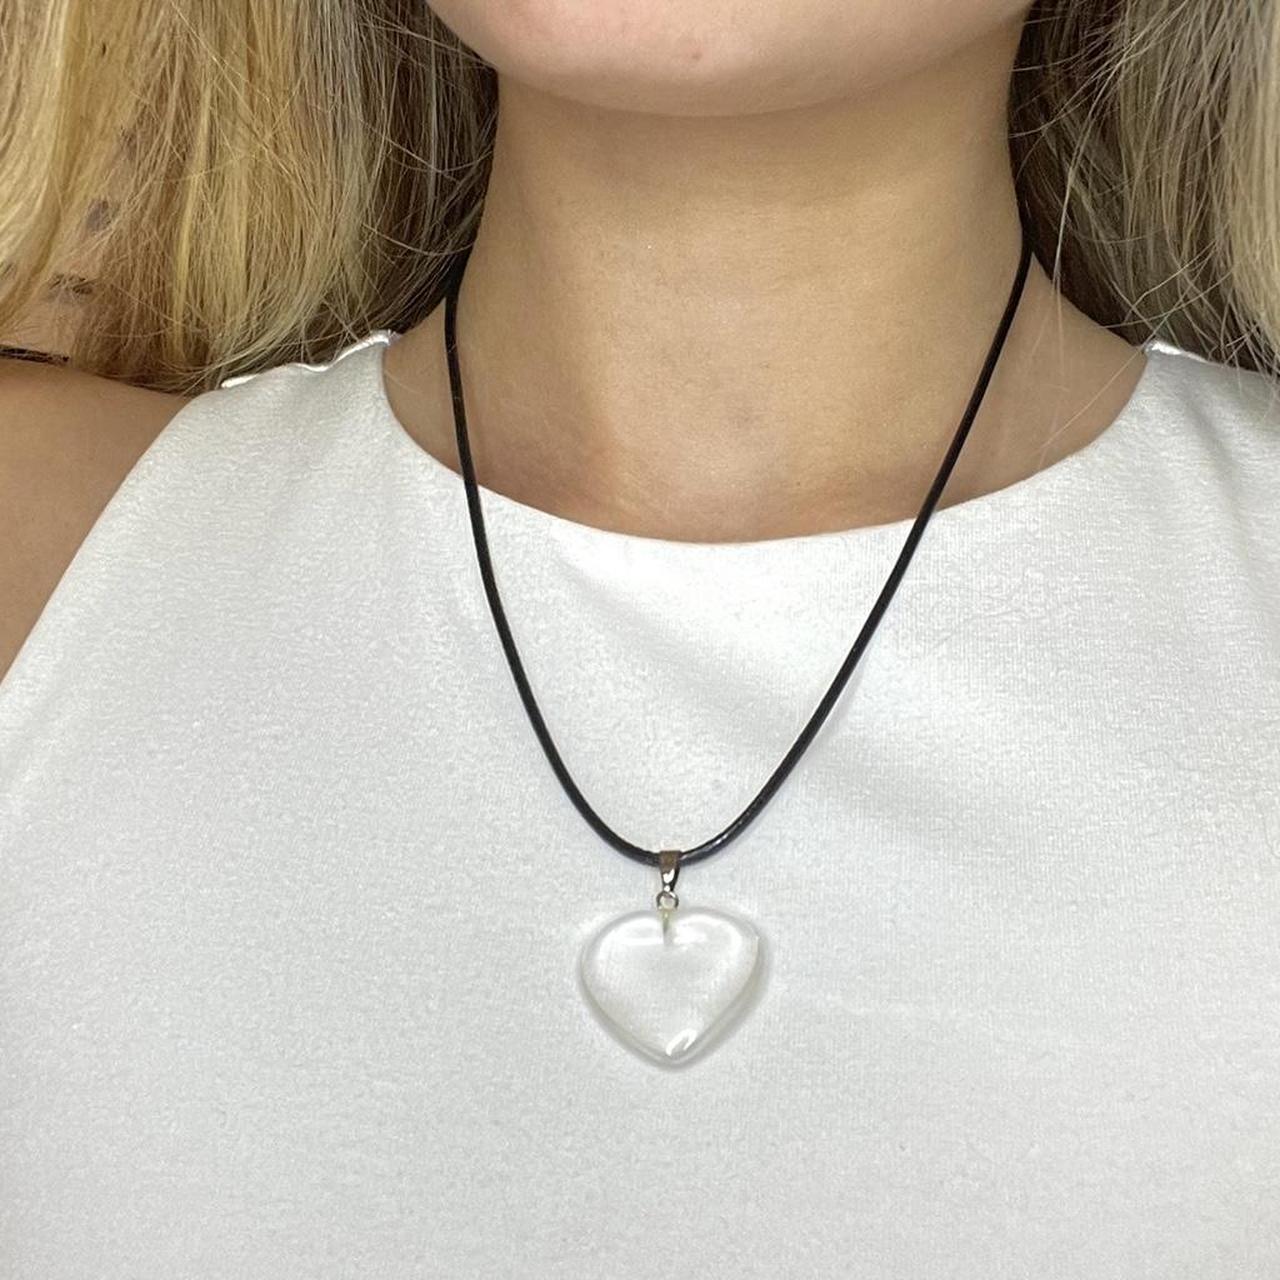 Buy Clear Quartz Heart Necklace, Quartz Heart Pendant on Stainless Chain or  Black Cord, Choose Length Online in India - Etsy